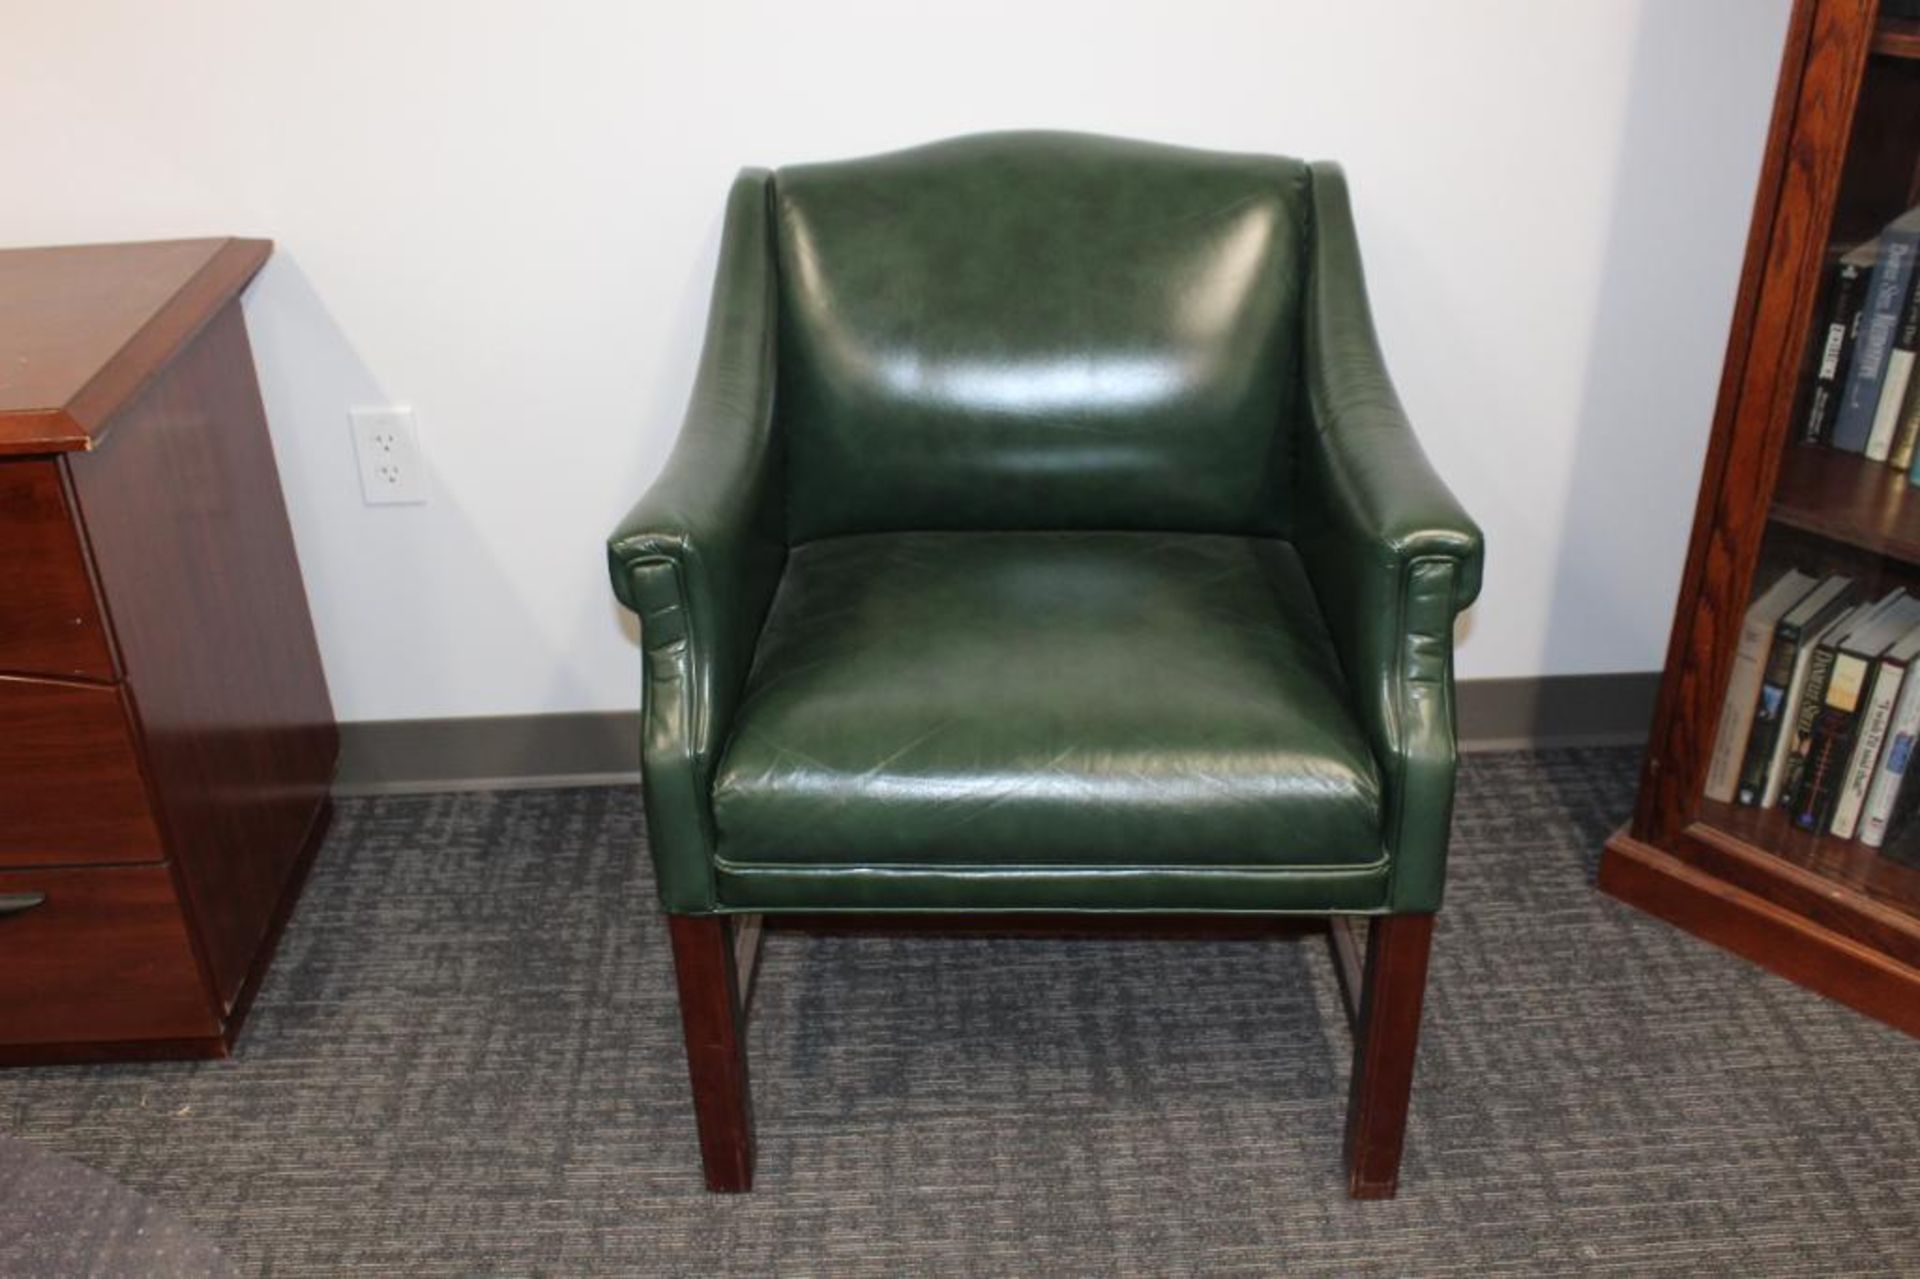 Green Leather Couch & Chair - Image 2 of 2